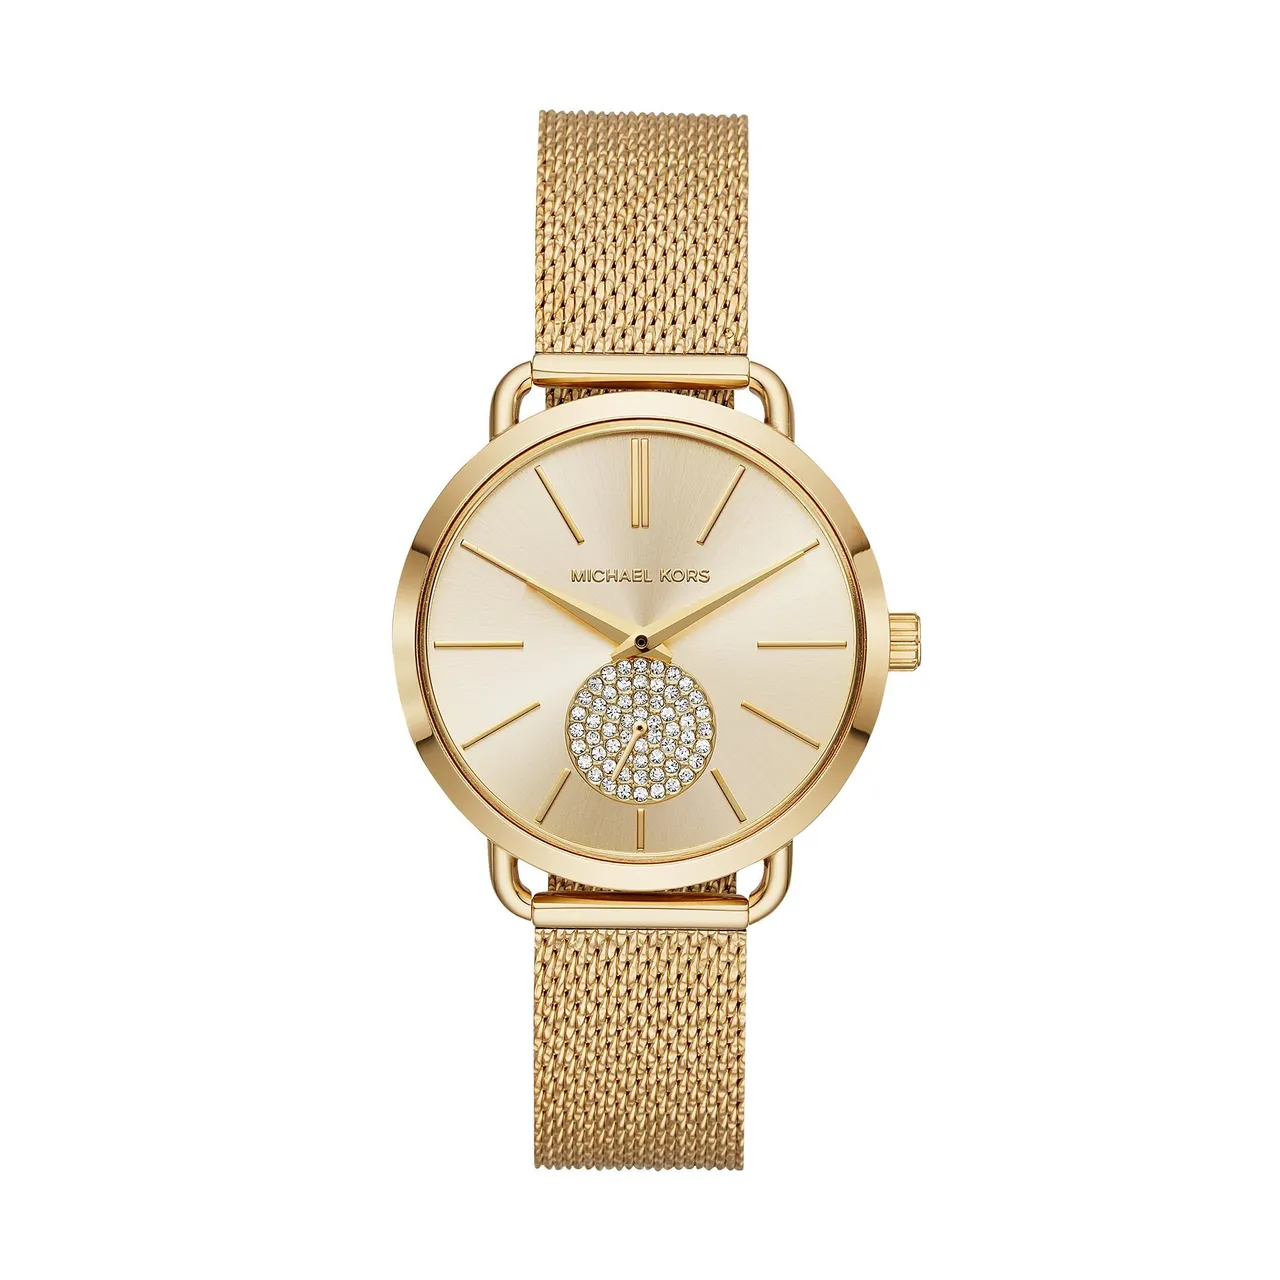 Michael Kors Portia with Gold Tone Stainless Steel Strap